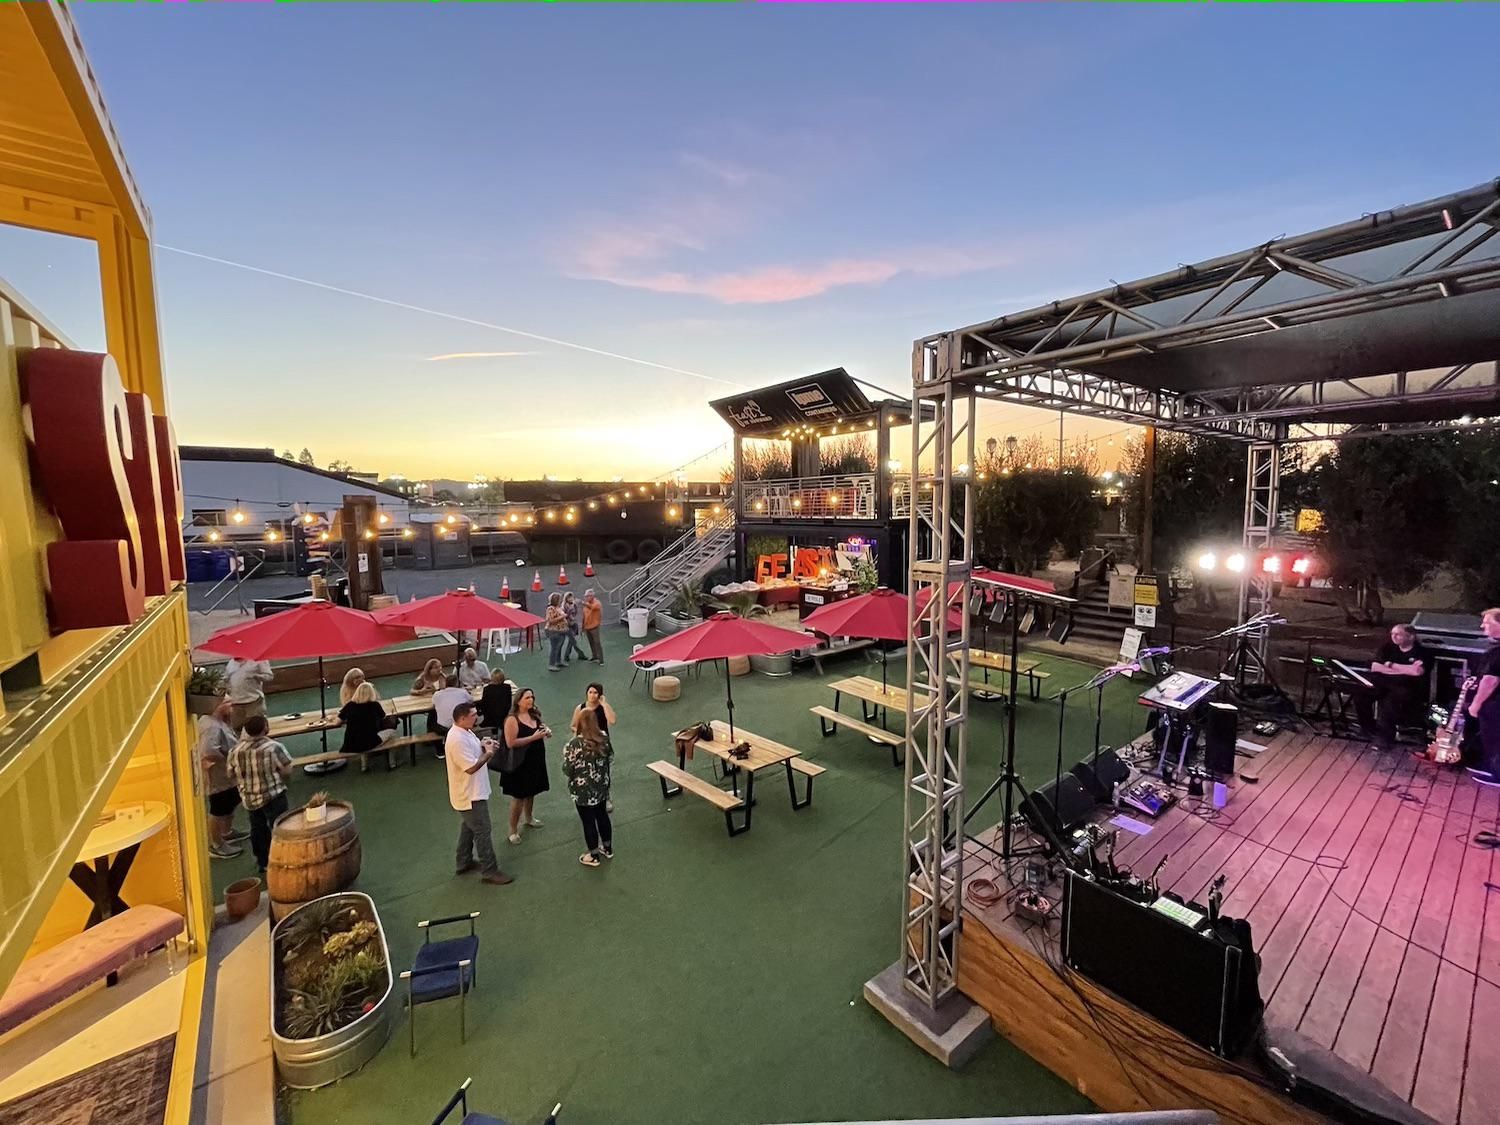 It's always festival season at Napa's newest events space, The Yard by Feast it Forward